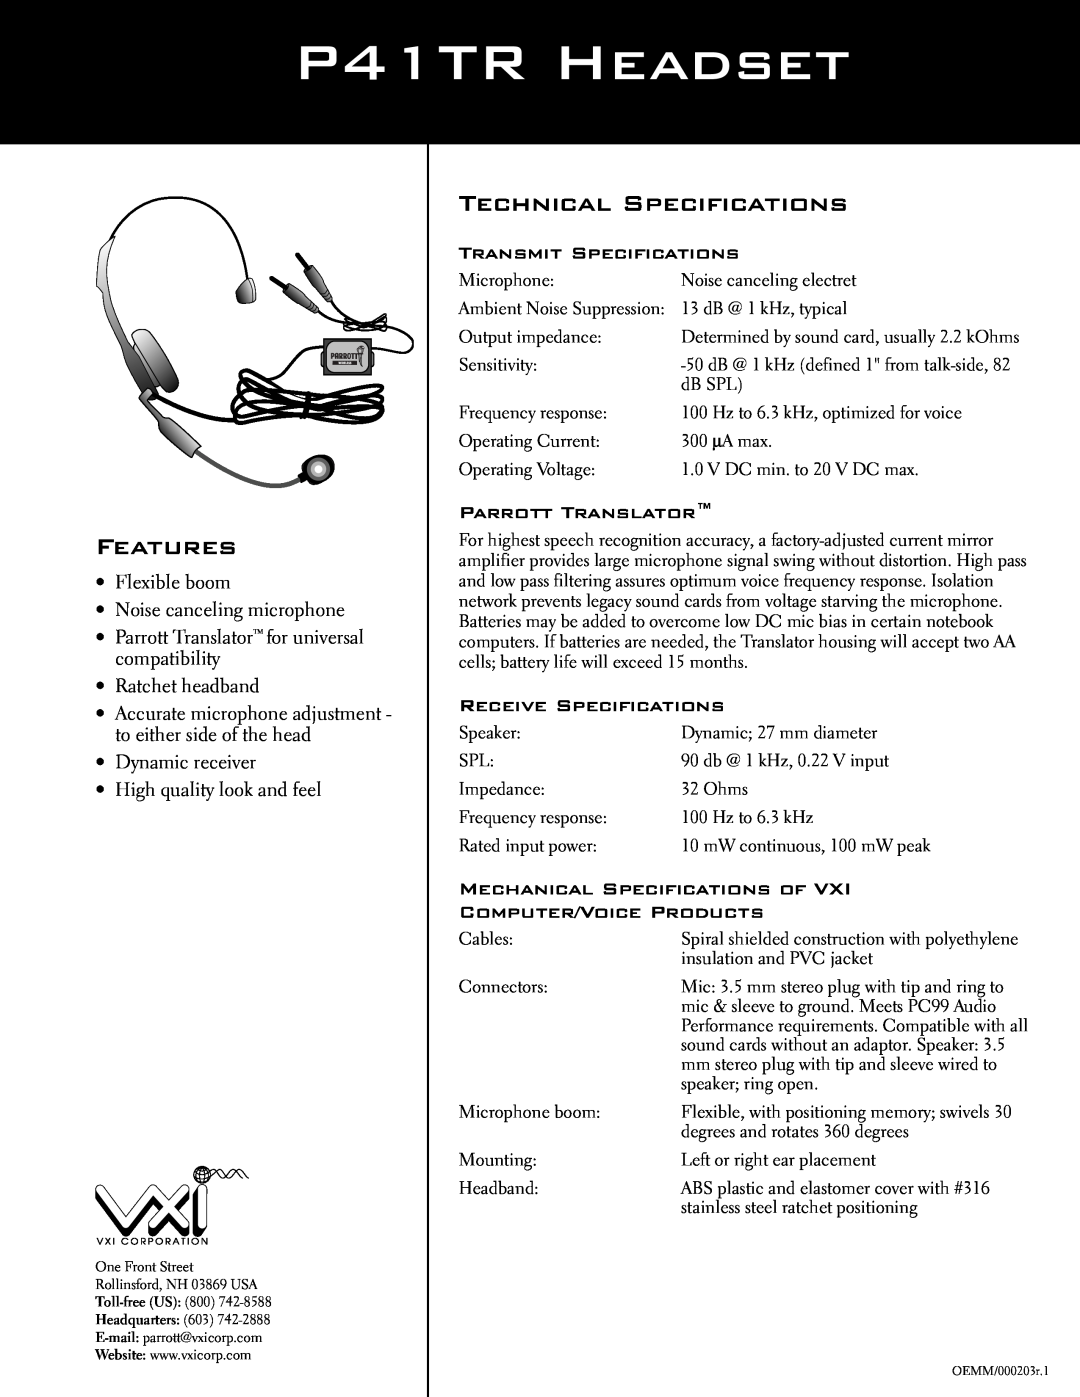 VXI technical specifications P41TR Headset, Features, Technical Specifications, Transmit Specifications 